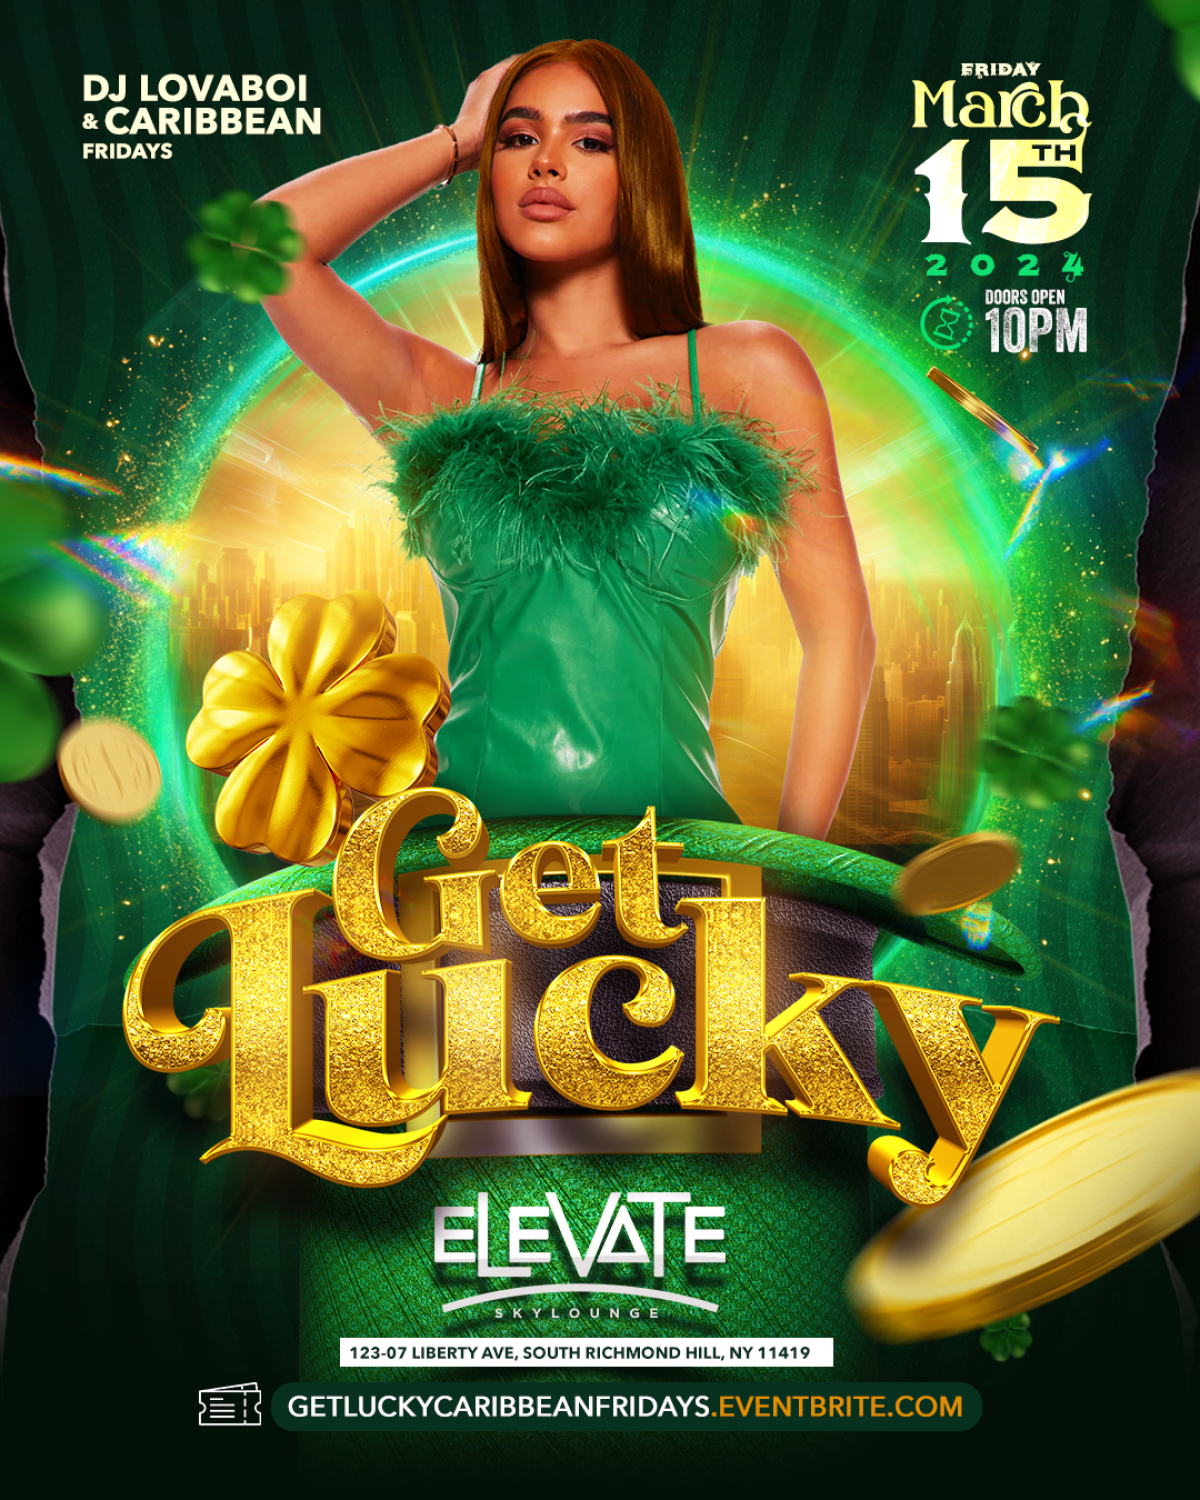 Get Lucky, Caribbean Fridays flyer or graphic.